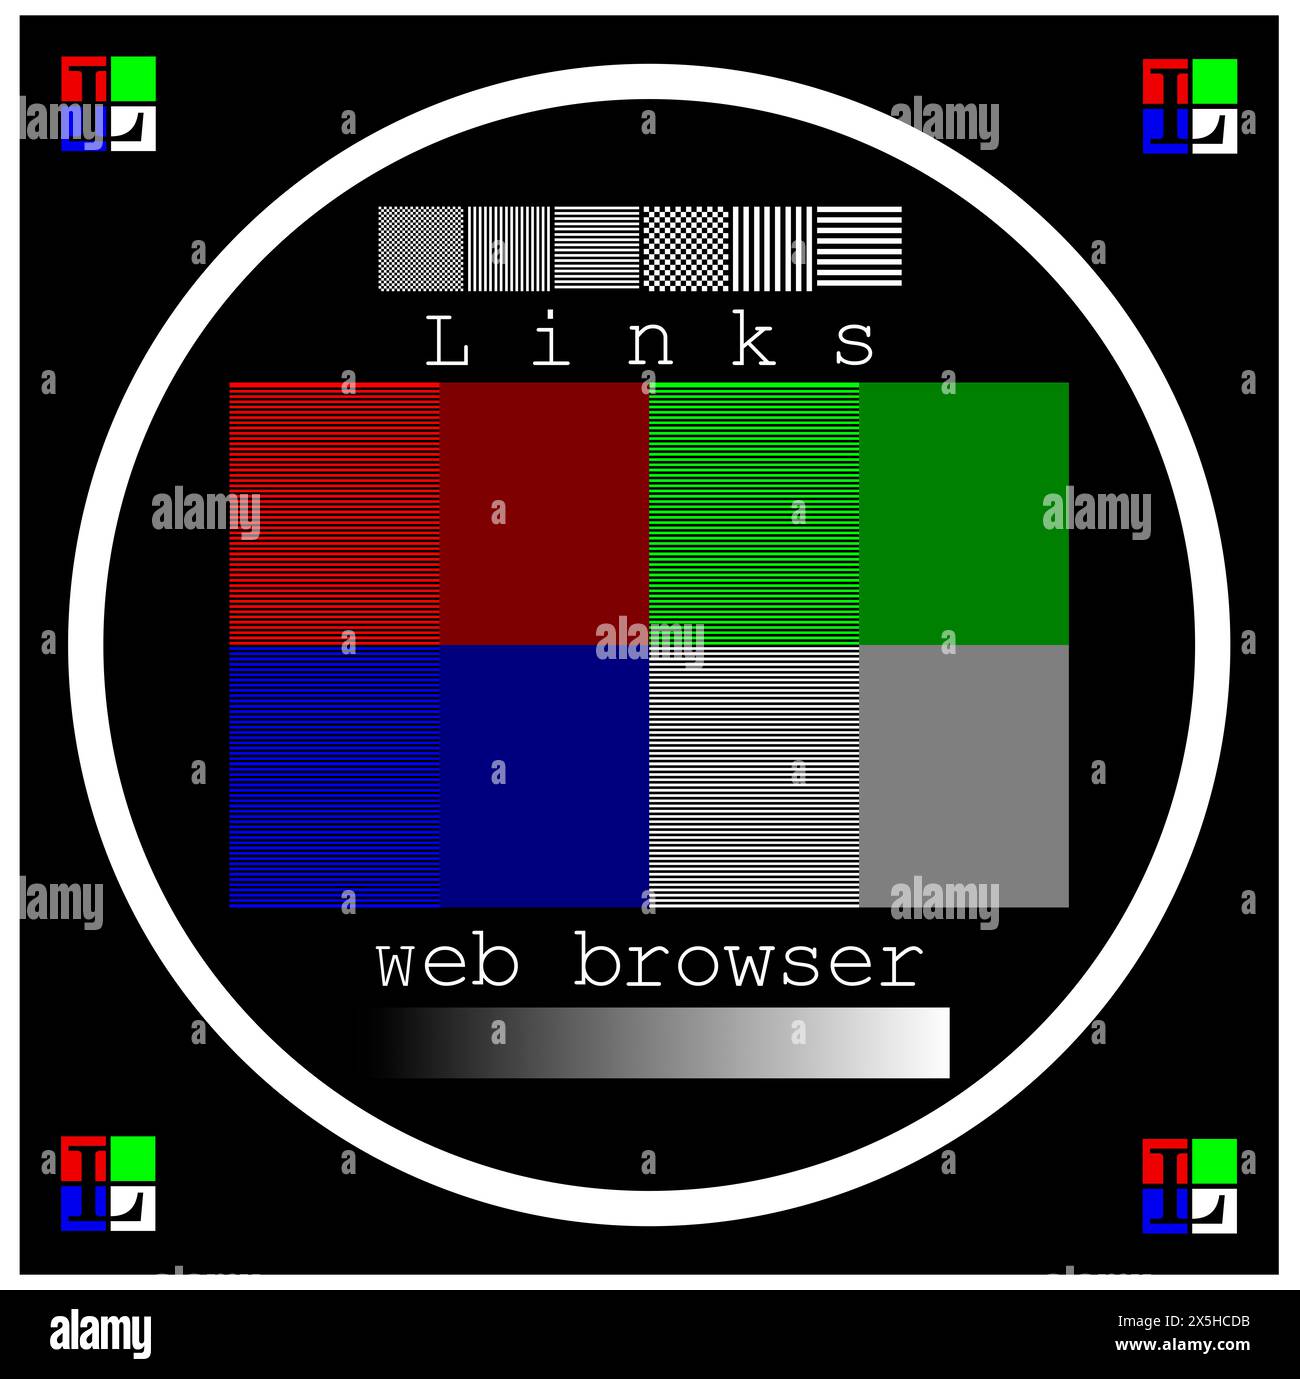 Links web browser test card Stock Photo